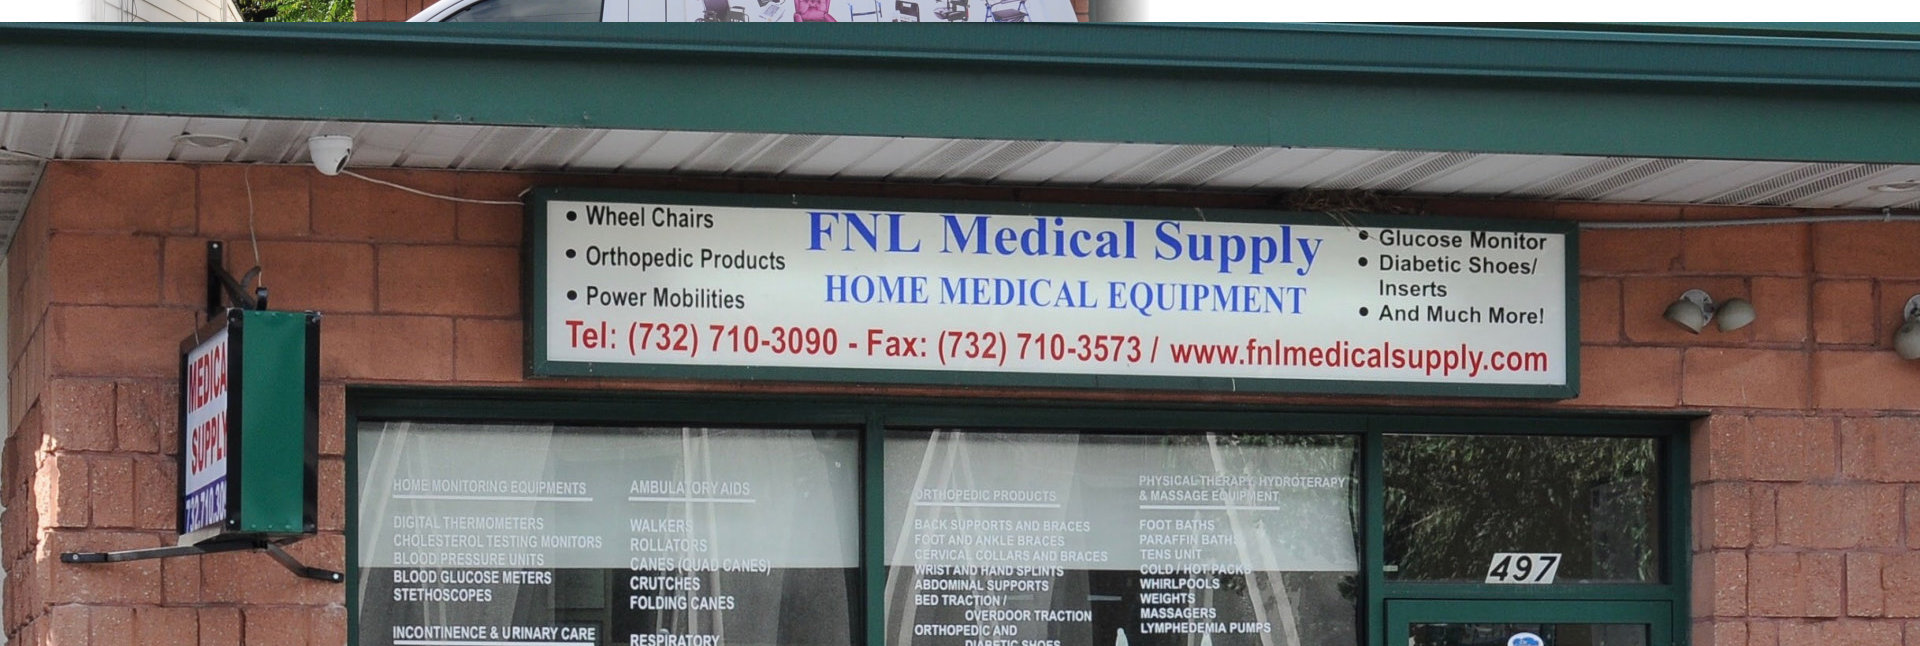 FNL Medical Supply store